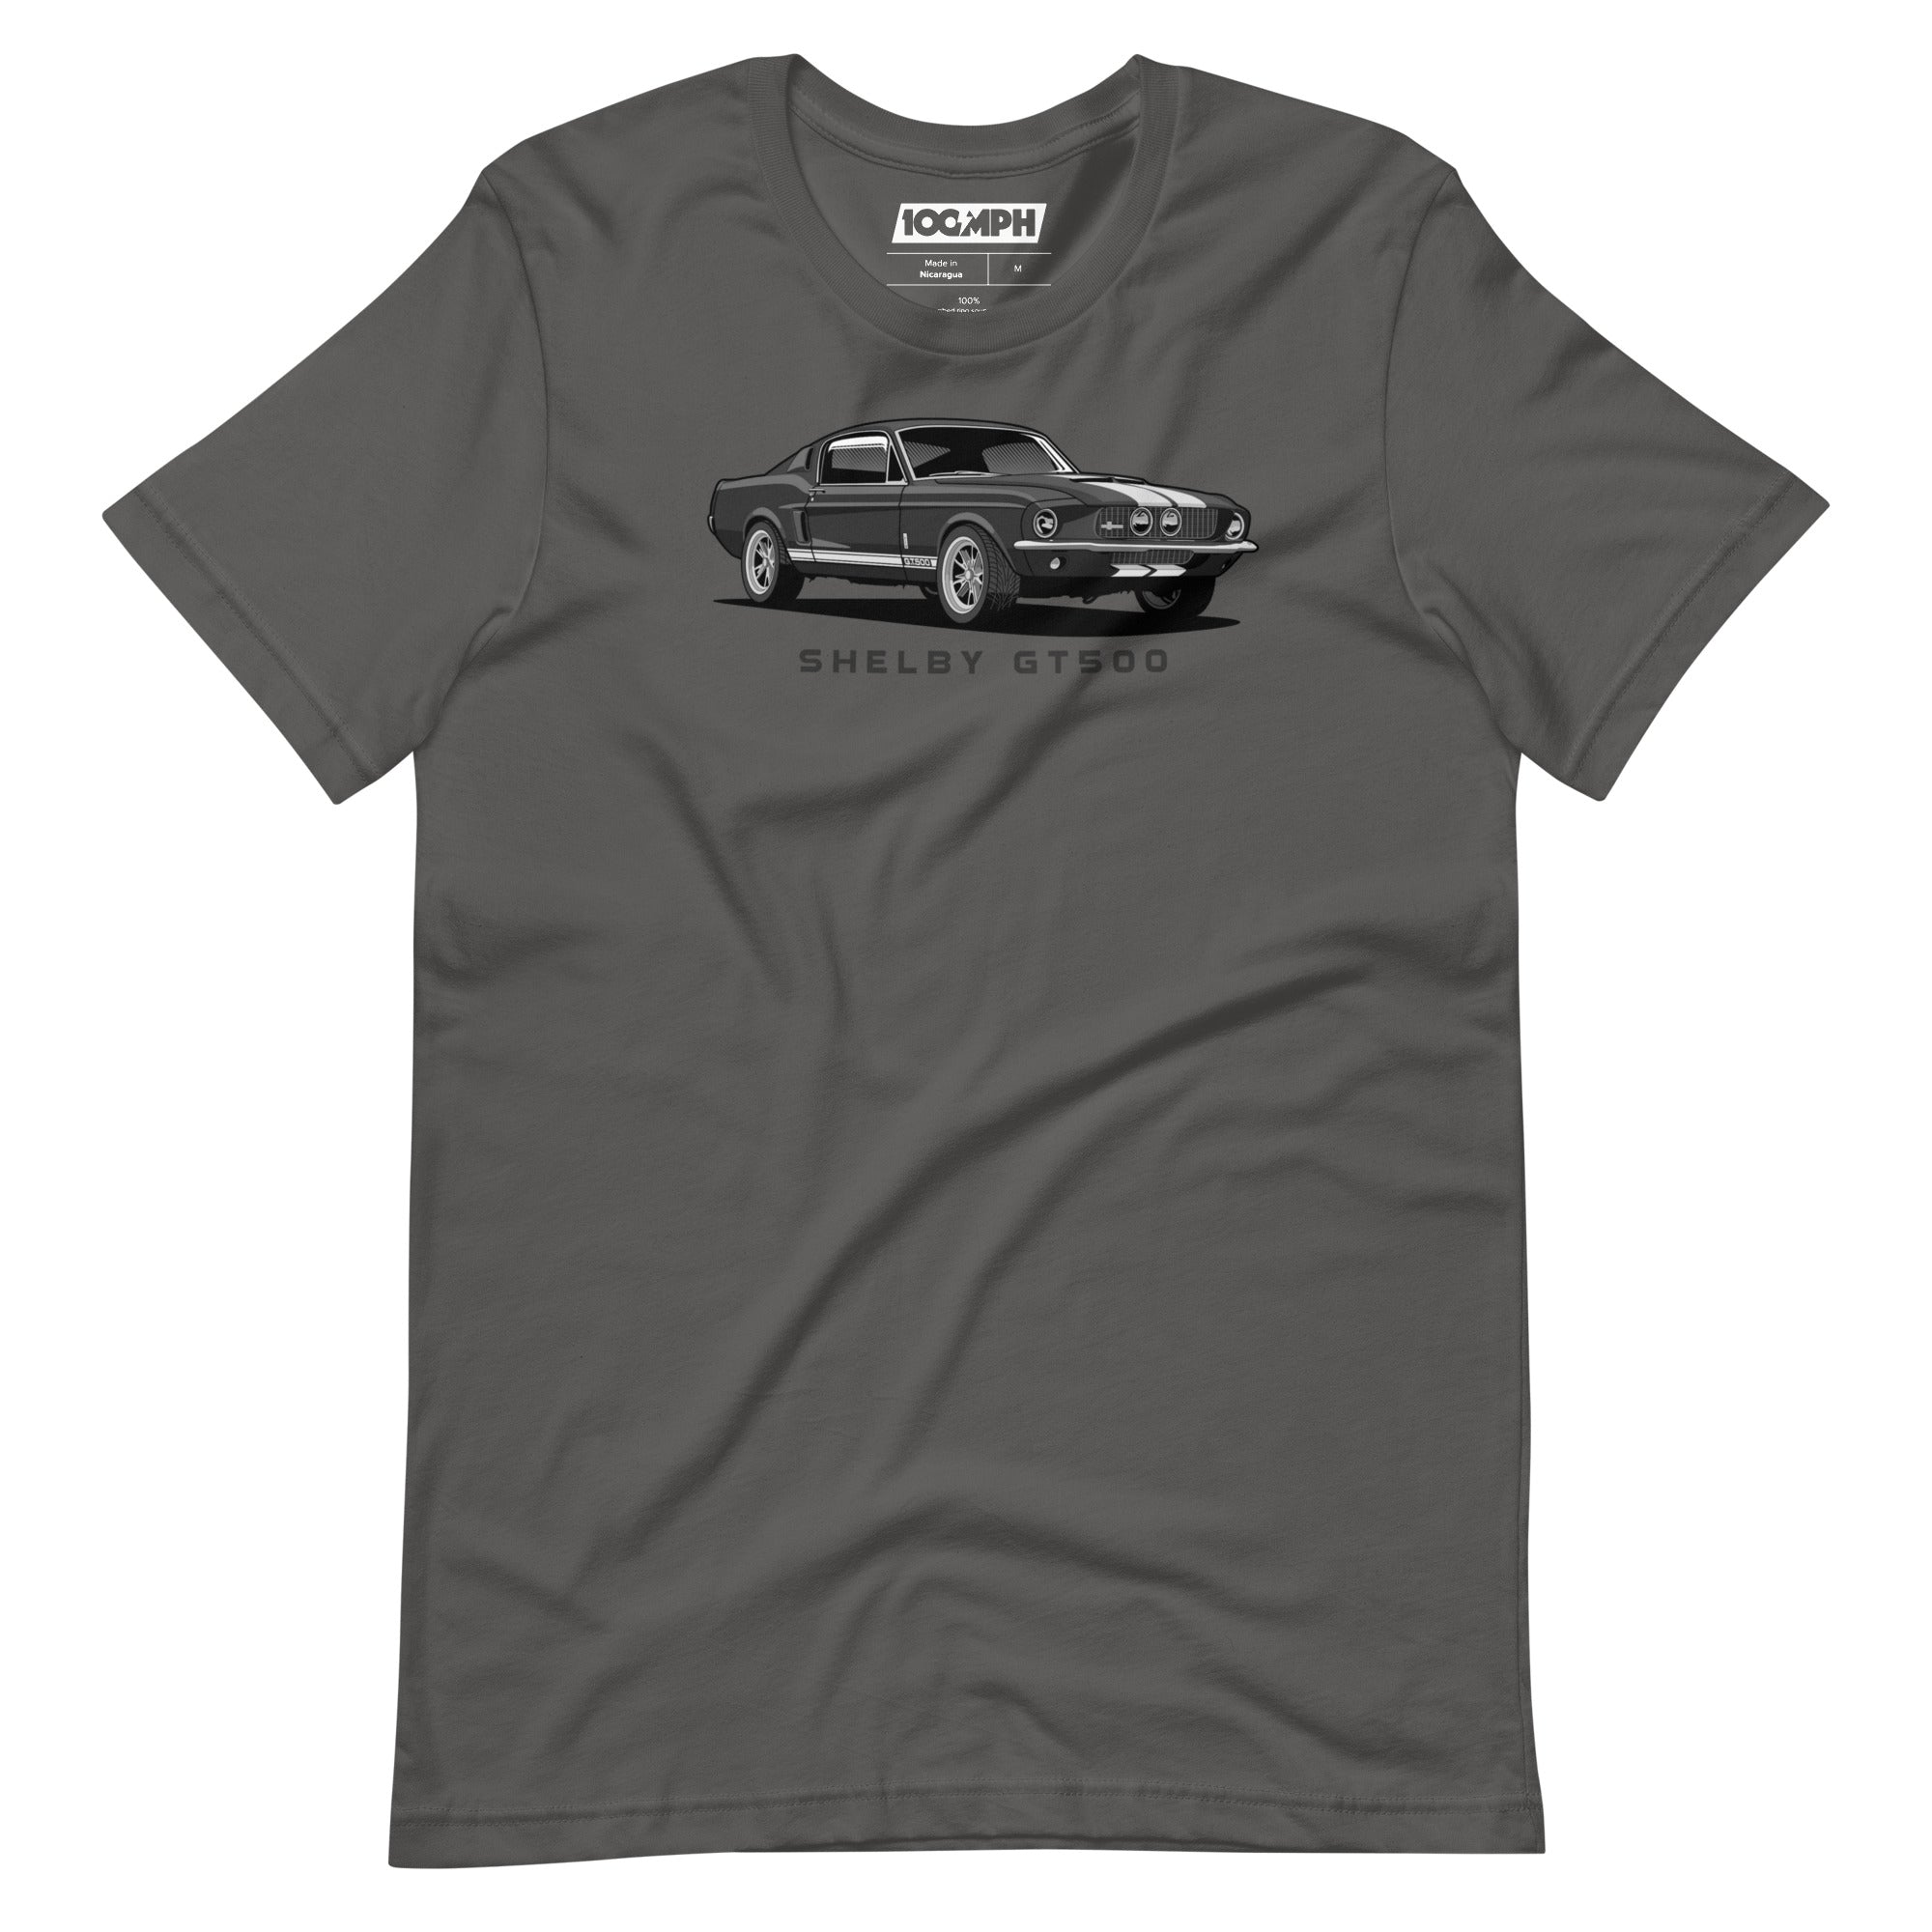 1967 Shelby GT500 T-Shirt – 100 Miles Per Hour